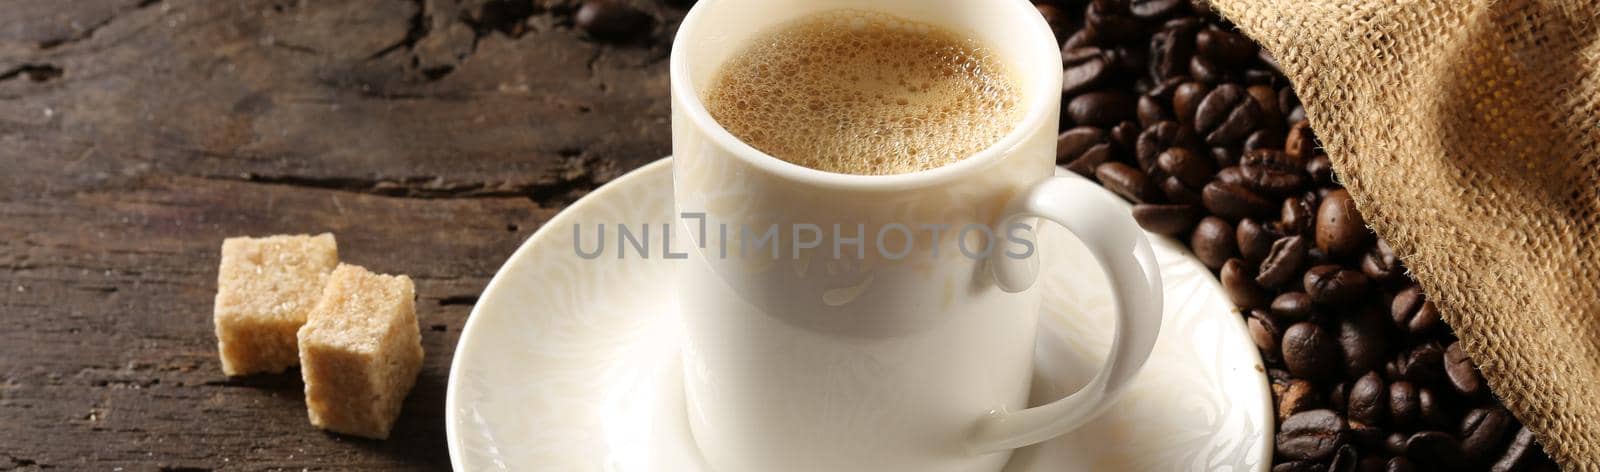 cup of coffee espresso in white porcelain cup with roasted coffee beans on old wood background with canvas bag